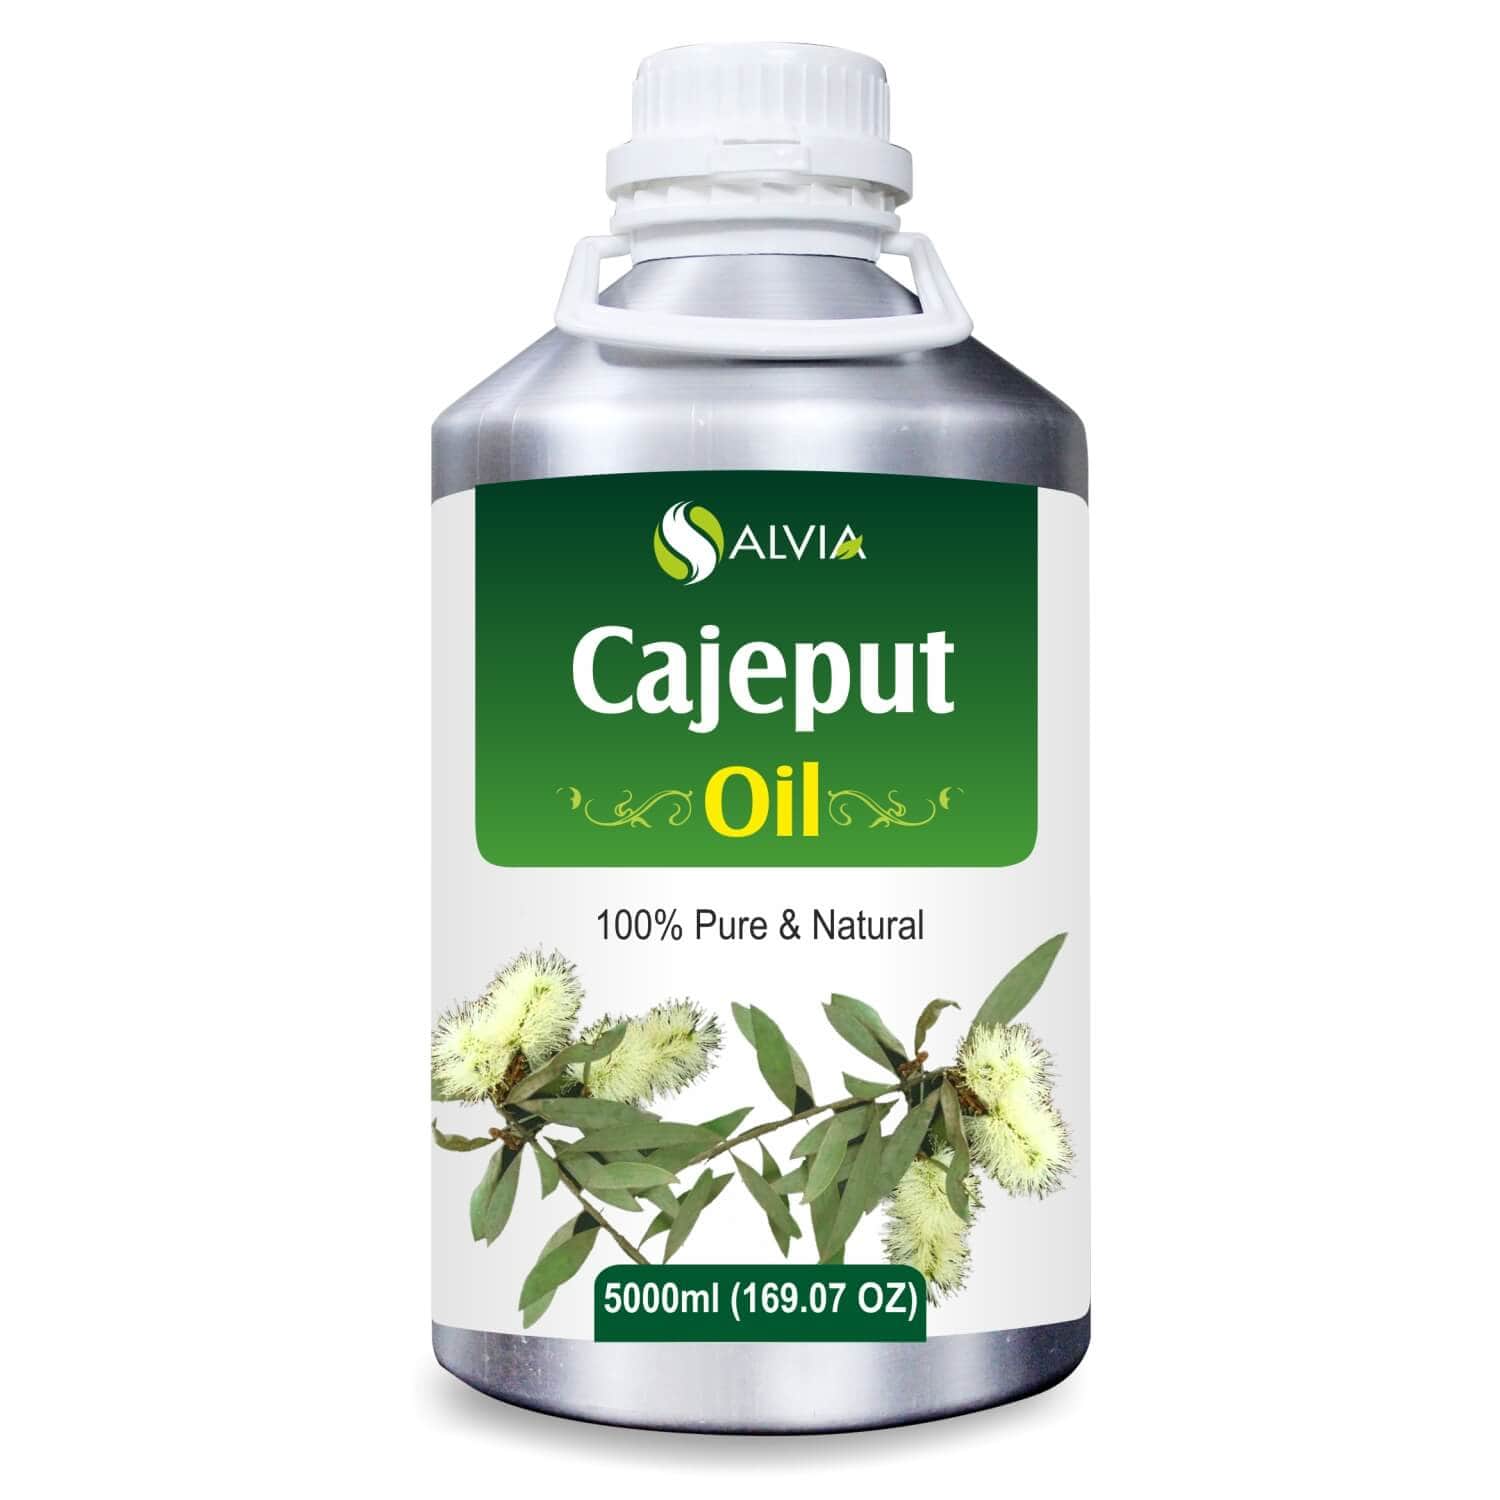 Salvia Natural Essential Oils 5000ml Cajeput Oil (Melaleuca leucadendron) 100% Natural Pure Essential Oil Treats Headaches, Colds, Reduces Fungal Infection, Treats Joint Pain